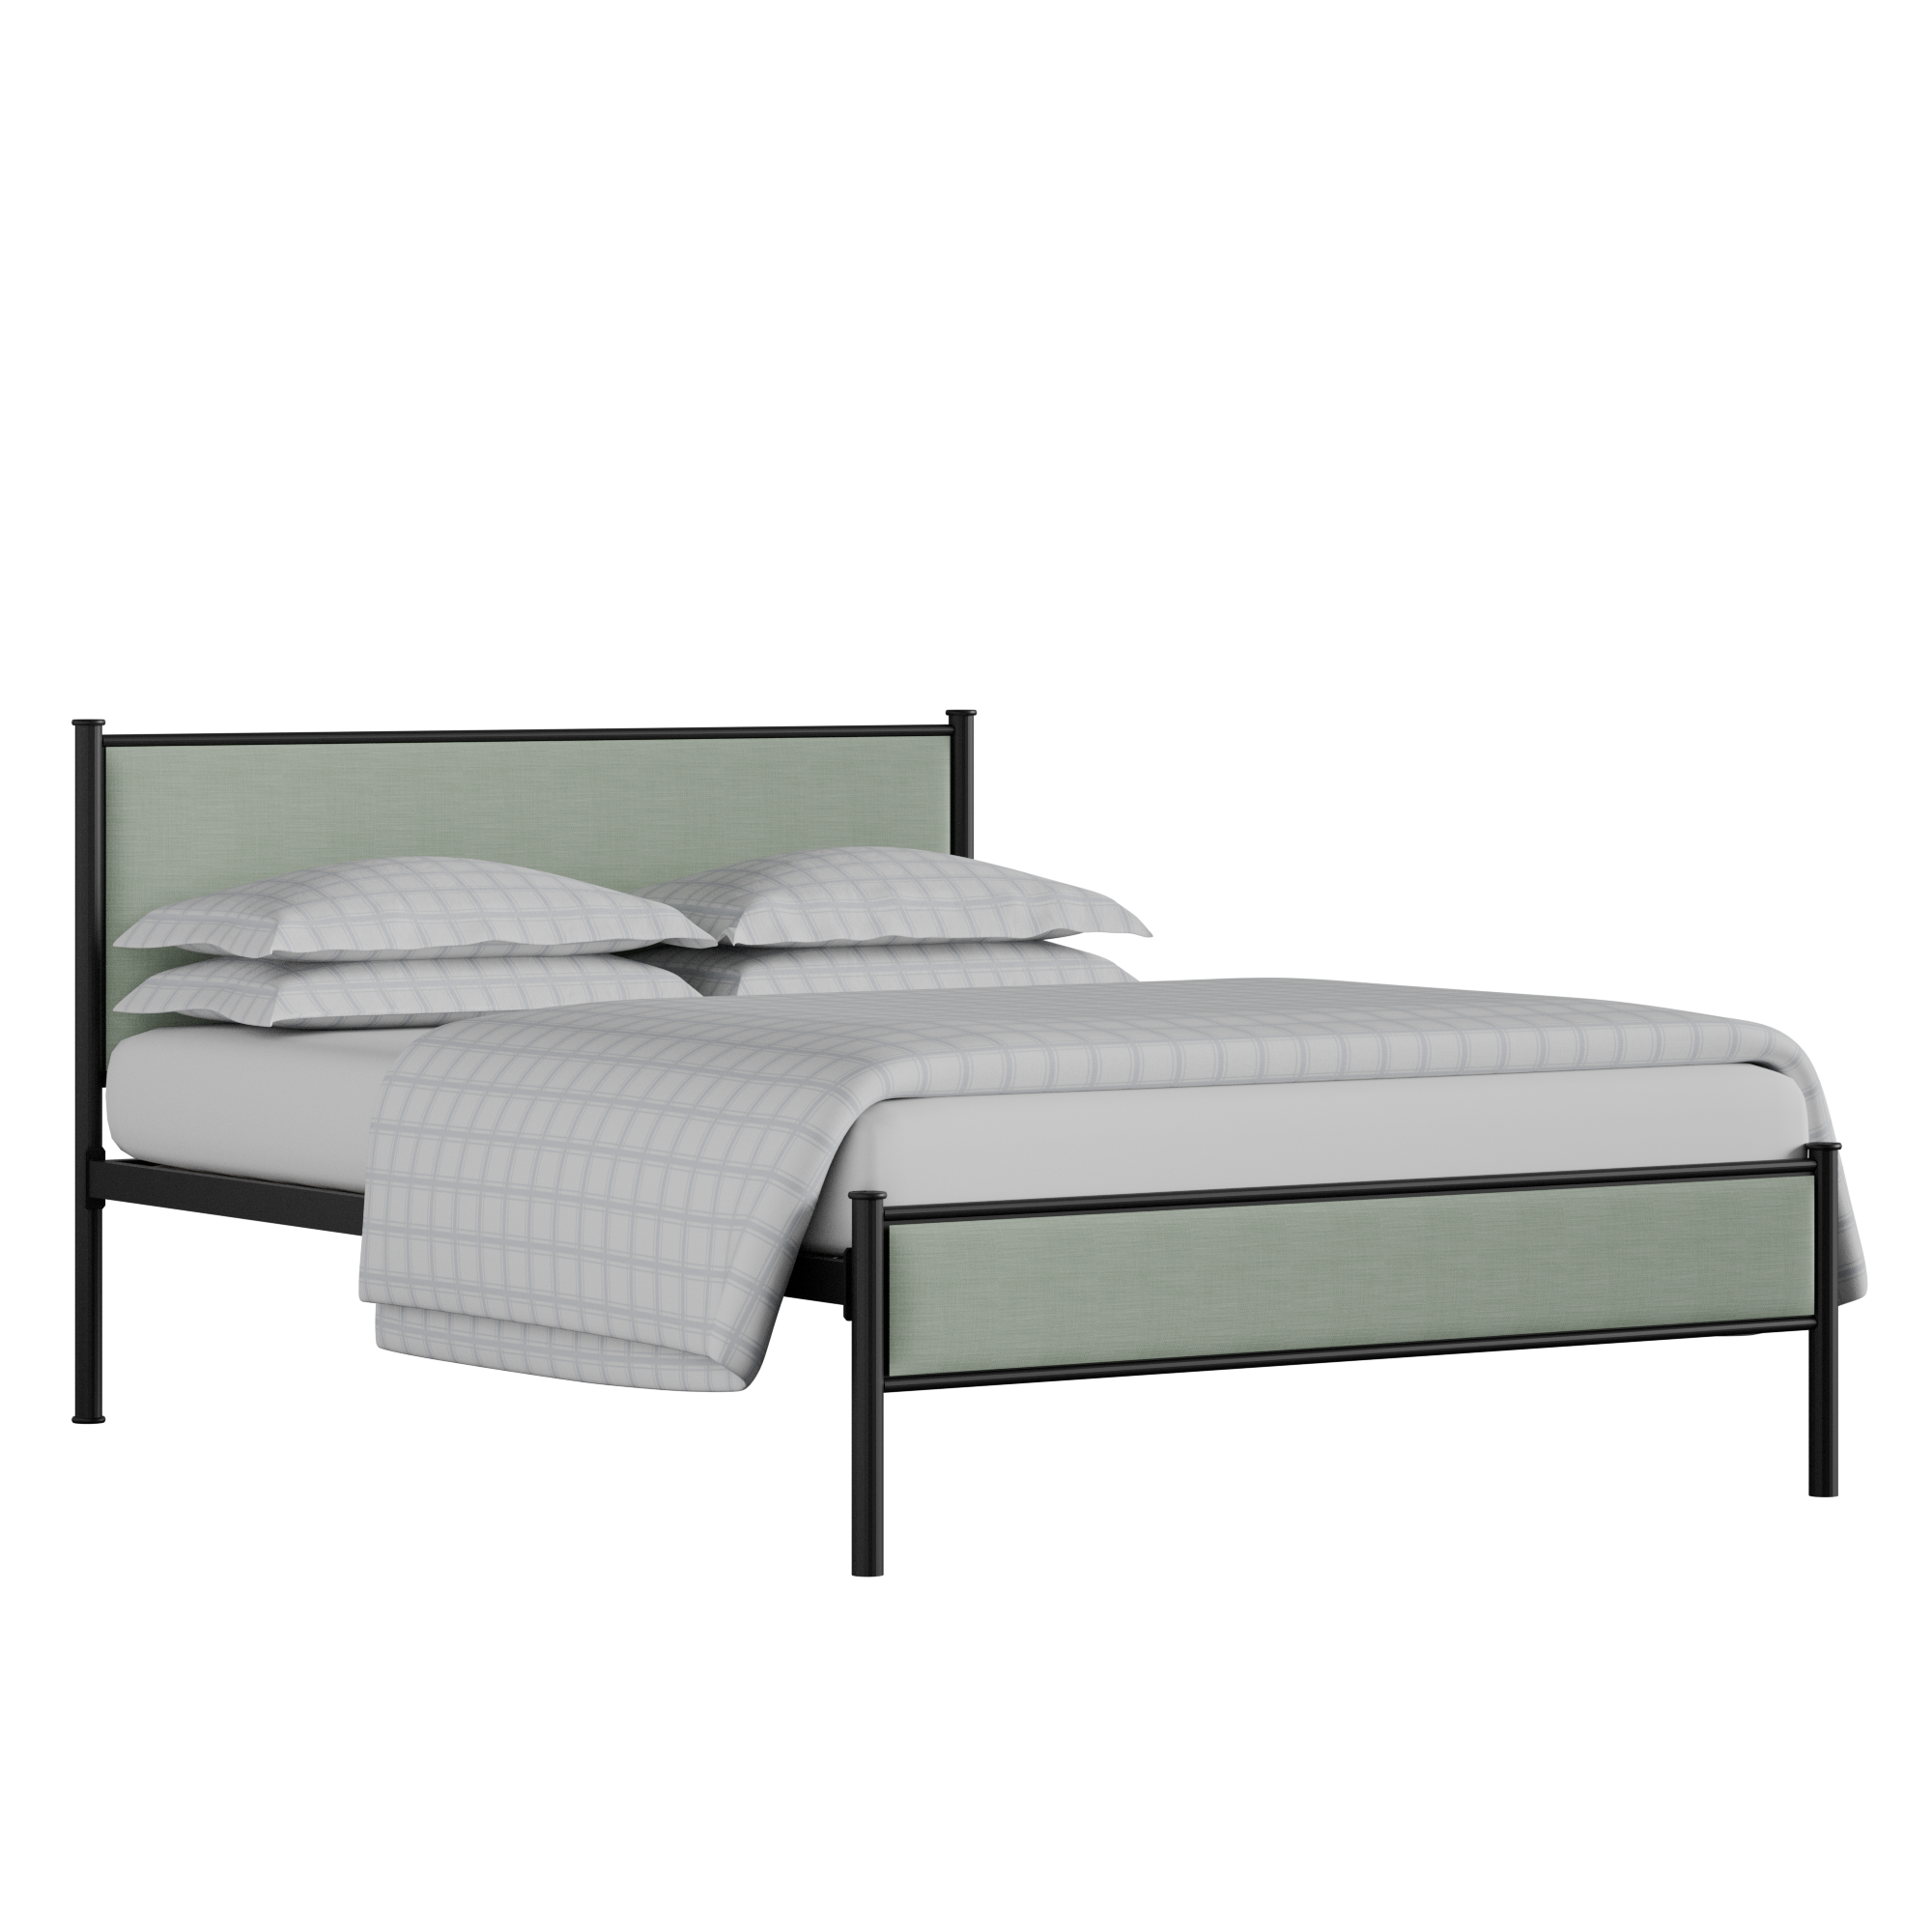 Brest iron/metal upholstered bed in black with duckegg fabric